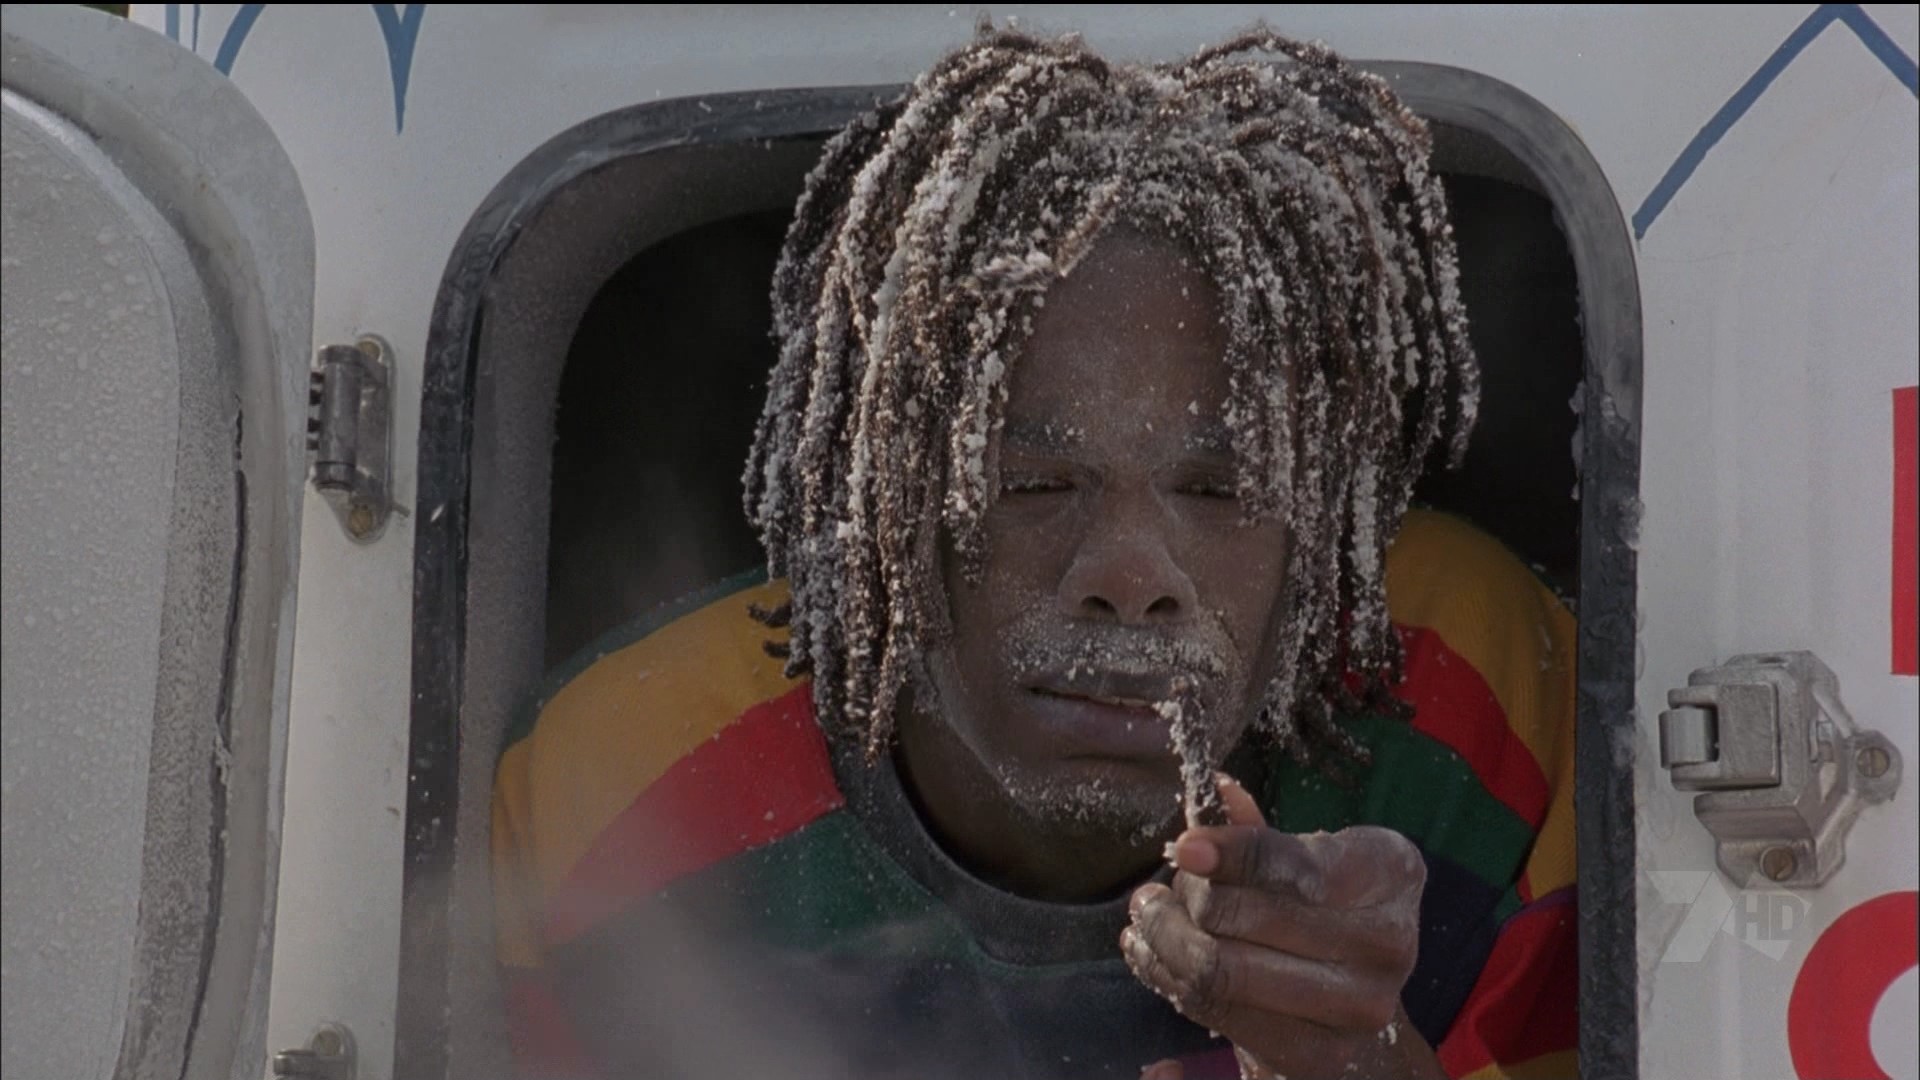 Cool Runnings Quotes Famous. Quotesgram